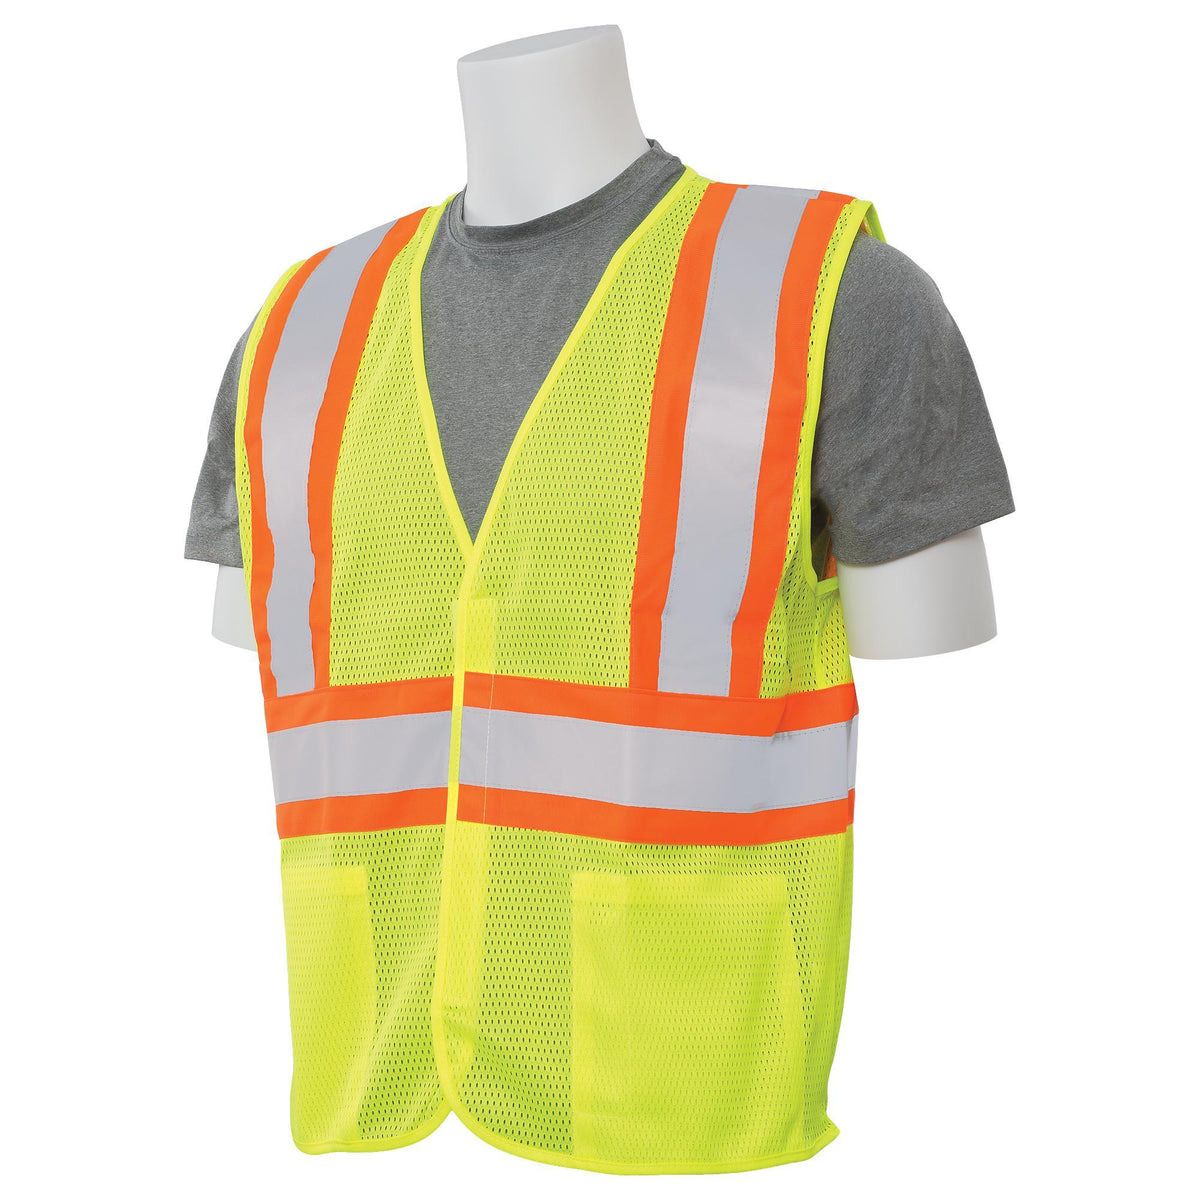 S382 Class 2 Mesh Safety Vest with Contrasting Tape 1PC